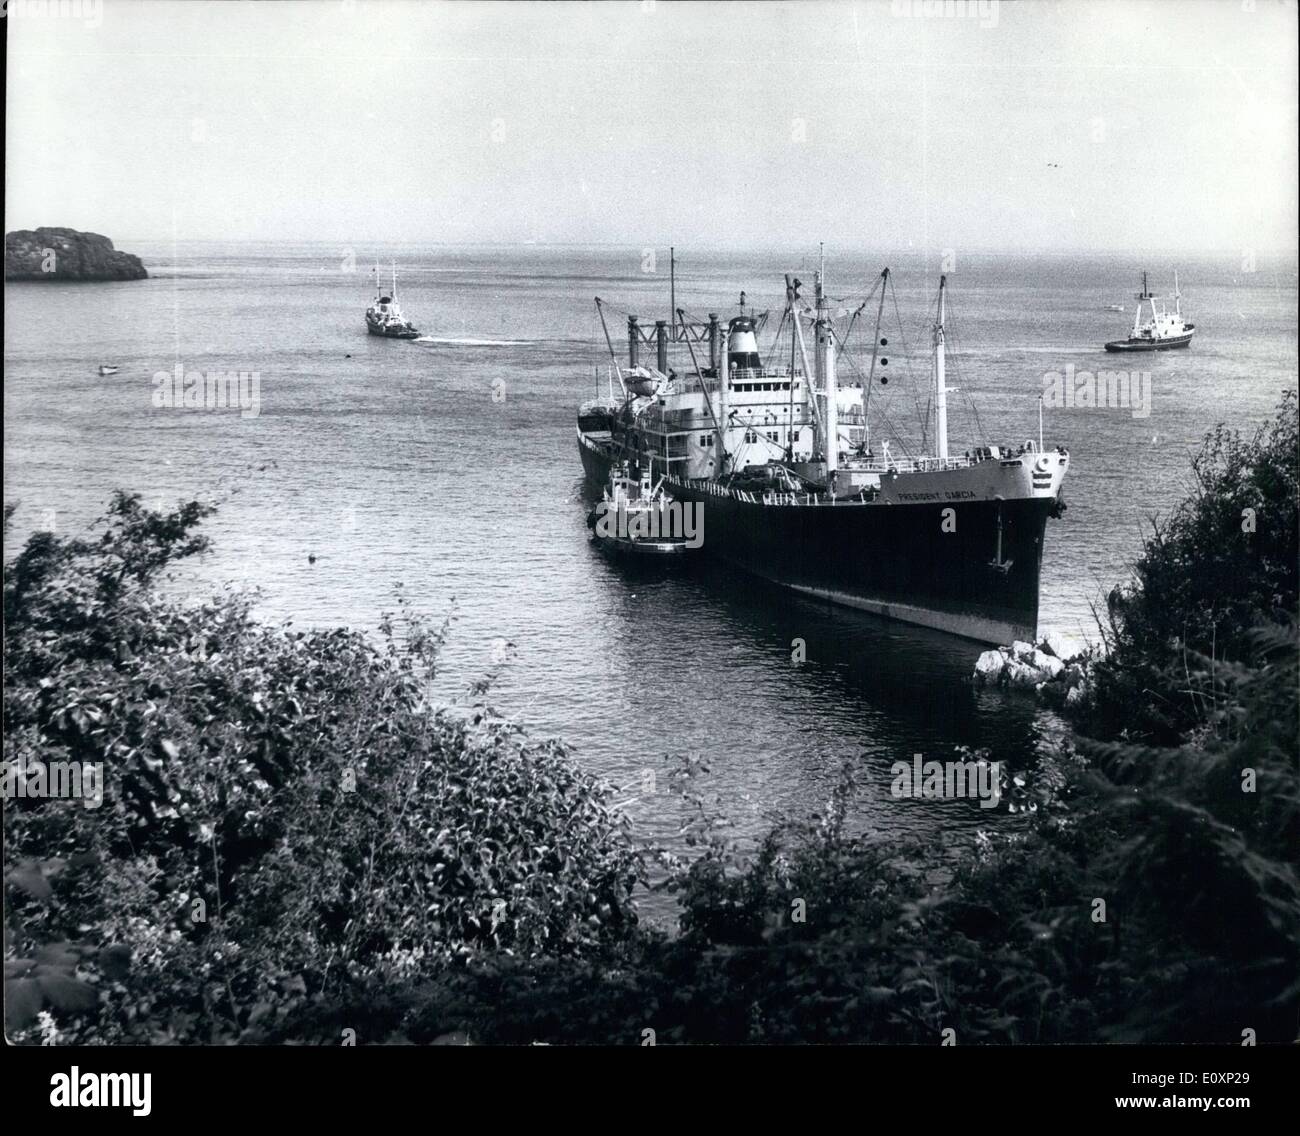 Jul. 07, 1967 - Sanded cargo ship ford in Guernsey. the Philippine cargo ship President Garcia which was aground for a week, was successfully towed off the rocks at Saint's Bay. Guernsey by threes Dutch tugs on Thursday evening. The tugs, two at sea and the other alongside, took an hour to slowly shift the ship. Secres of holidaymakers watched the operation and cheered the crew as the ship was pulled off. photo shows The scene as the president Garcia was successfully towed off the rocks at saints bay, Guernsey. Stock Photo